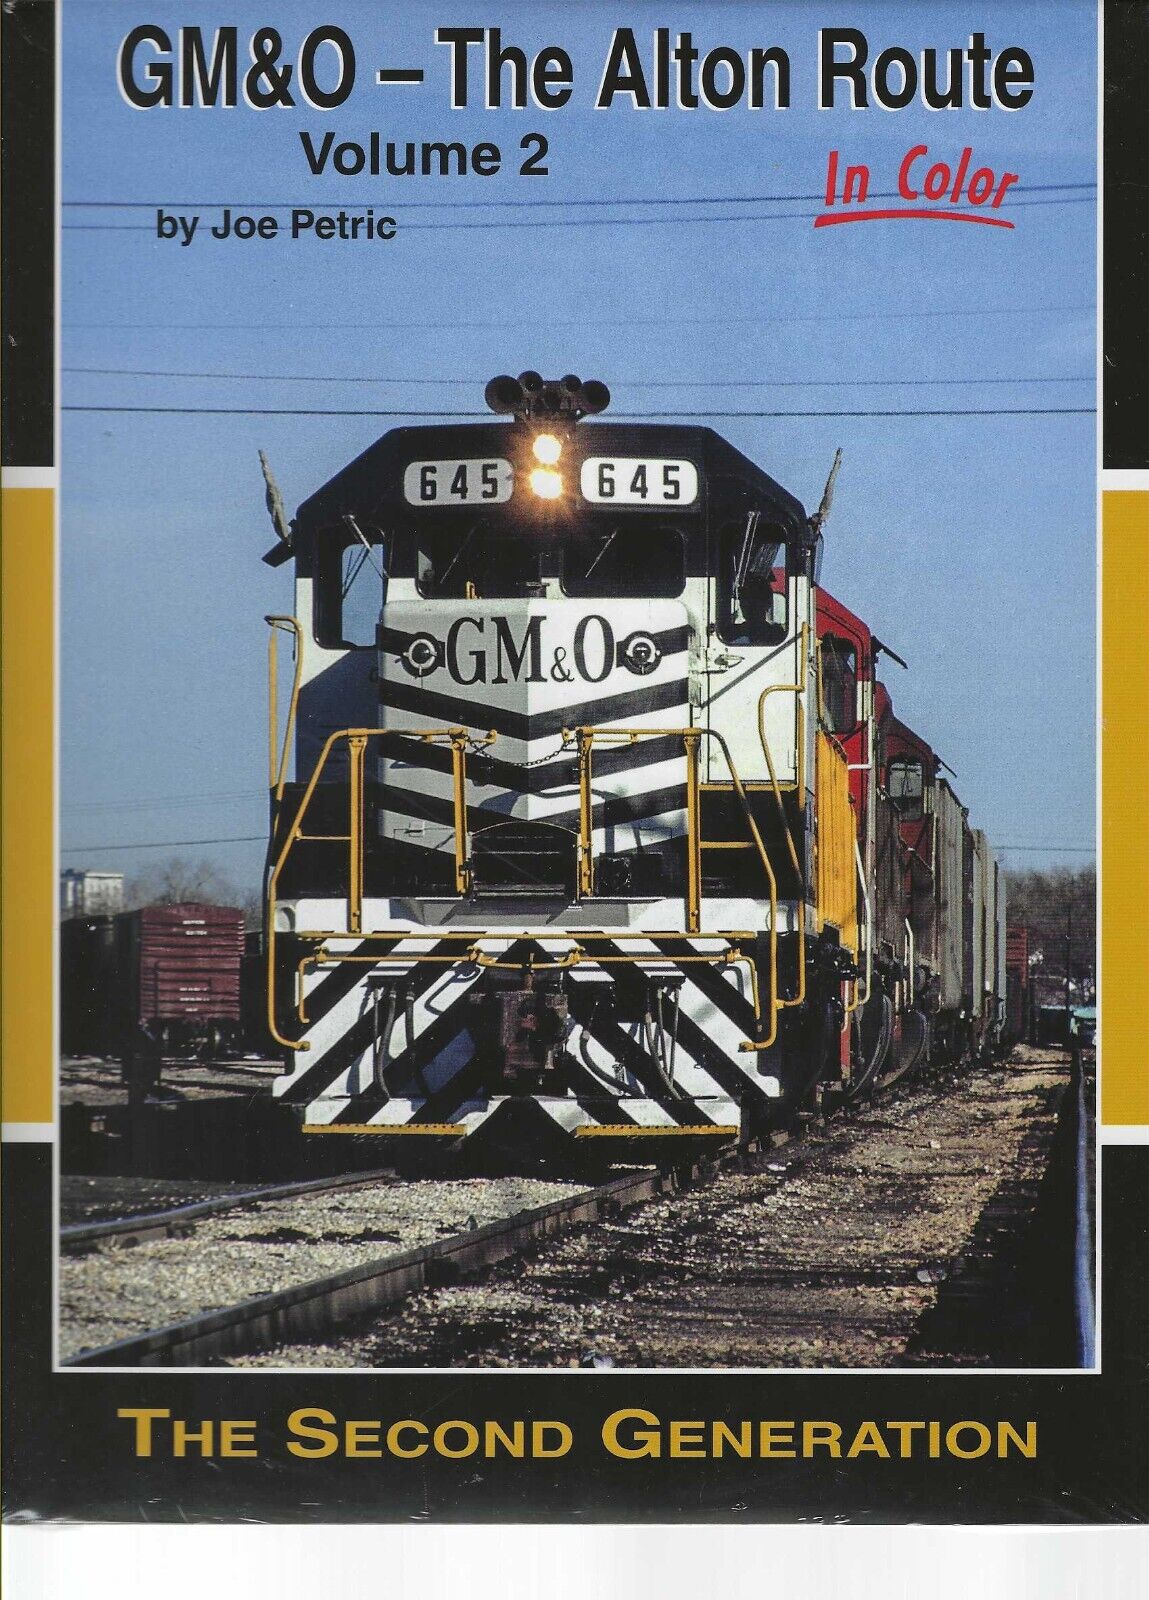 GM&O - The ALTON ROUTE in Color, Vol. 2 - The Second Generation (BRAND NEW BOOK)